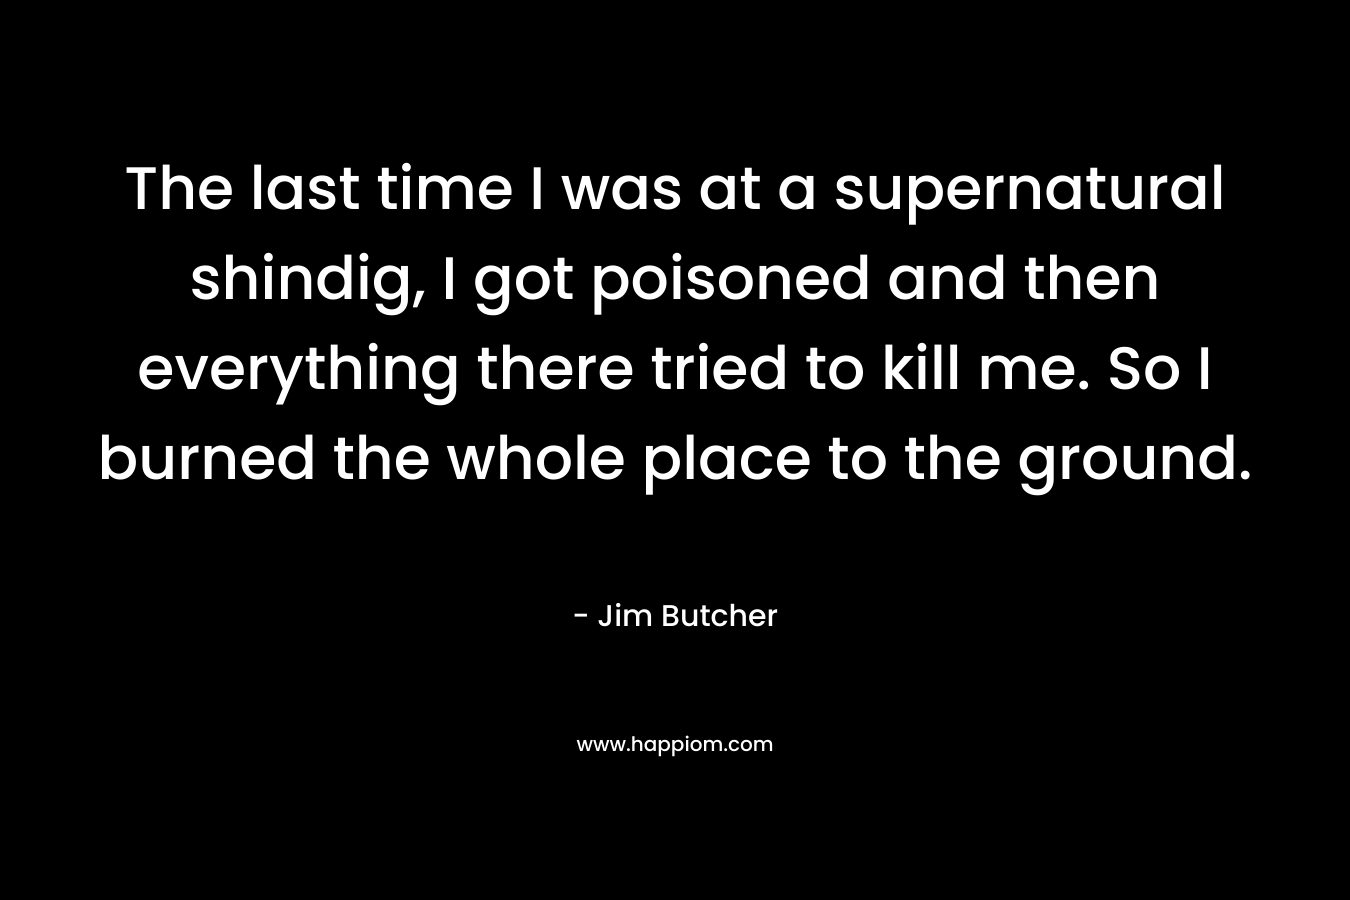 The last time I was at a supernatural shindig, I got poisoned and then everything there tried to kill me. So I burned the whole place to the ground. – Jim Butcher